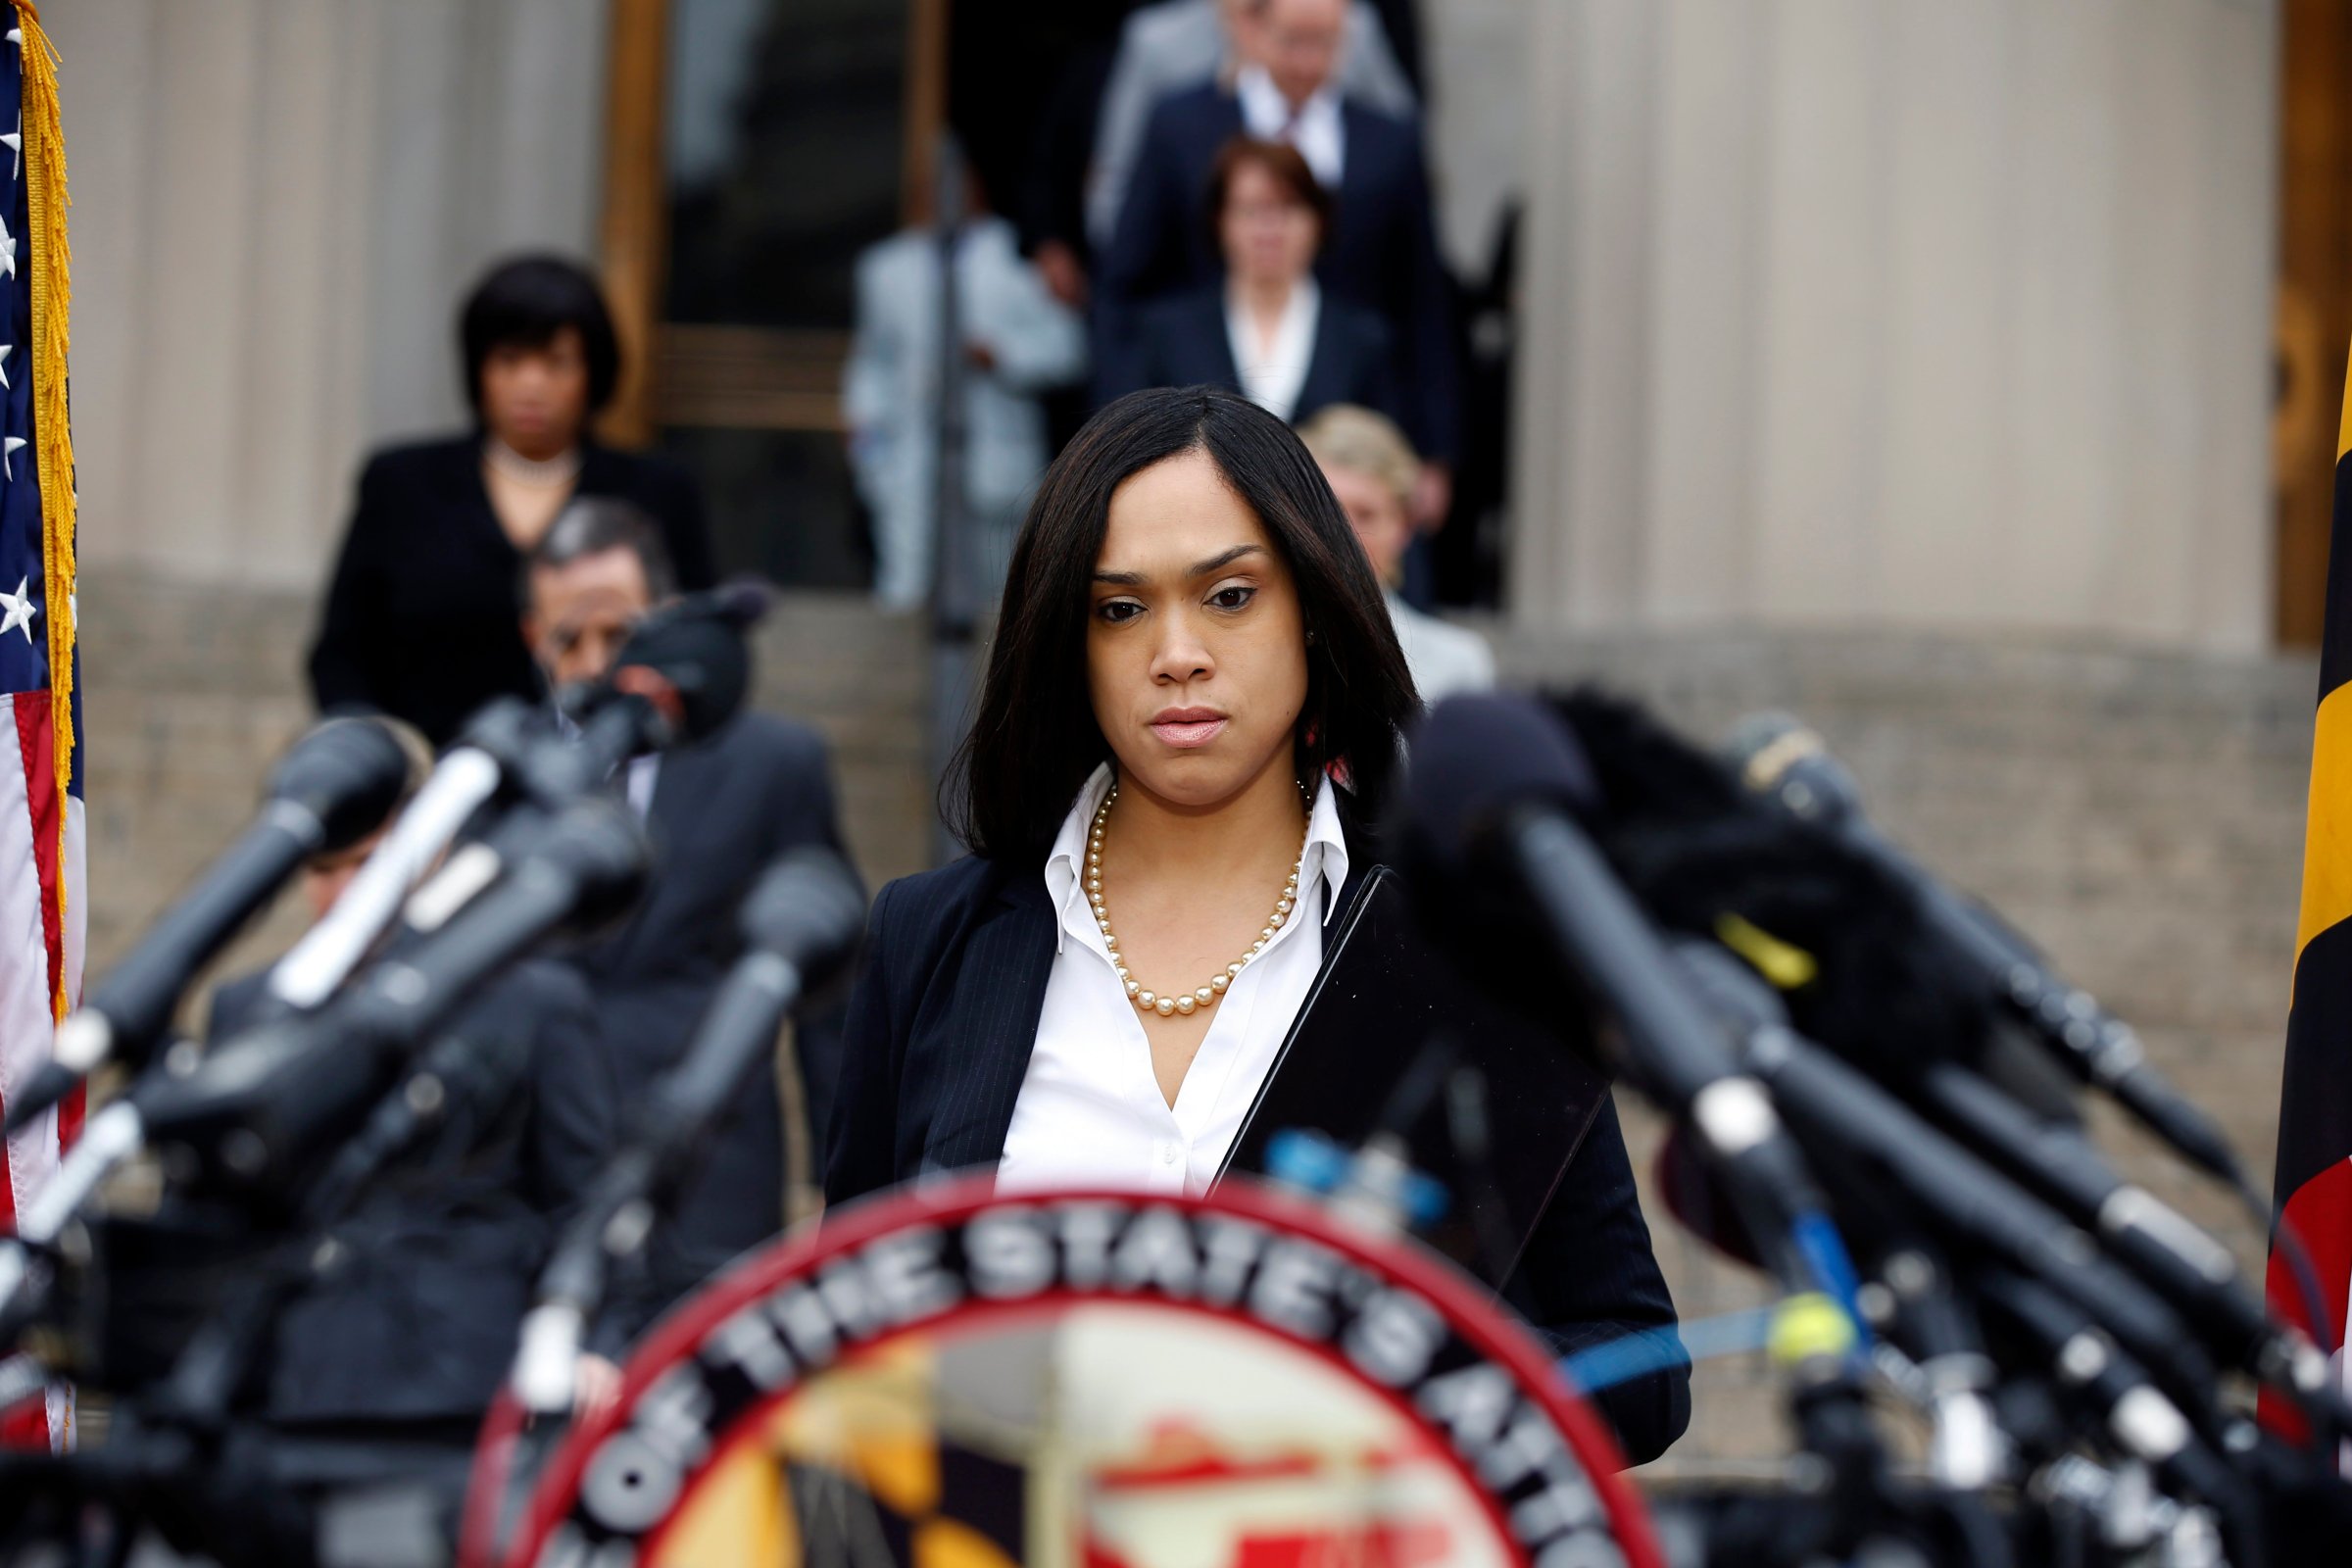 Marilyn Mosby, Baltimore state's attorney, approaches the podium for a media availability on May 1, 2015 in Baltimore.